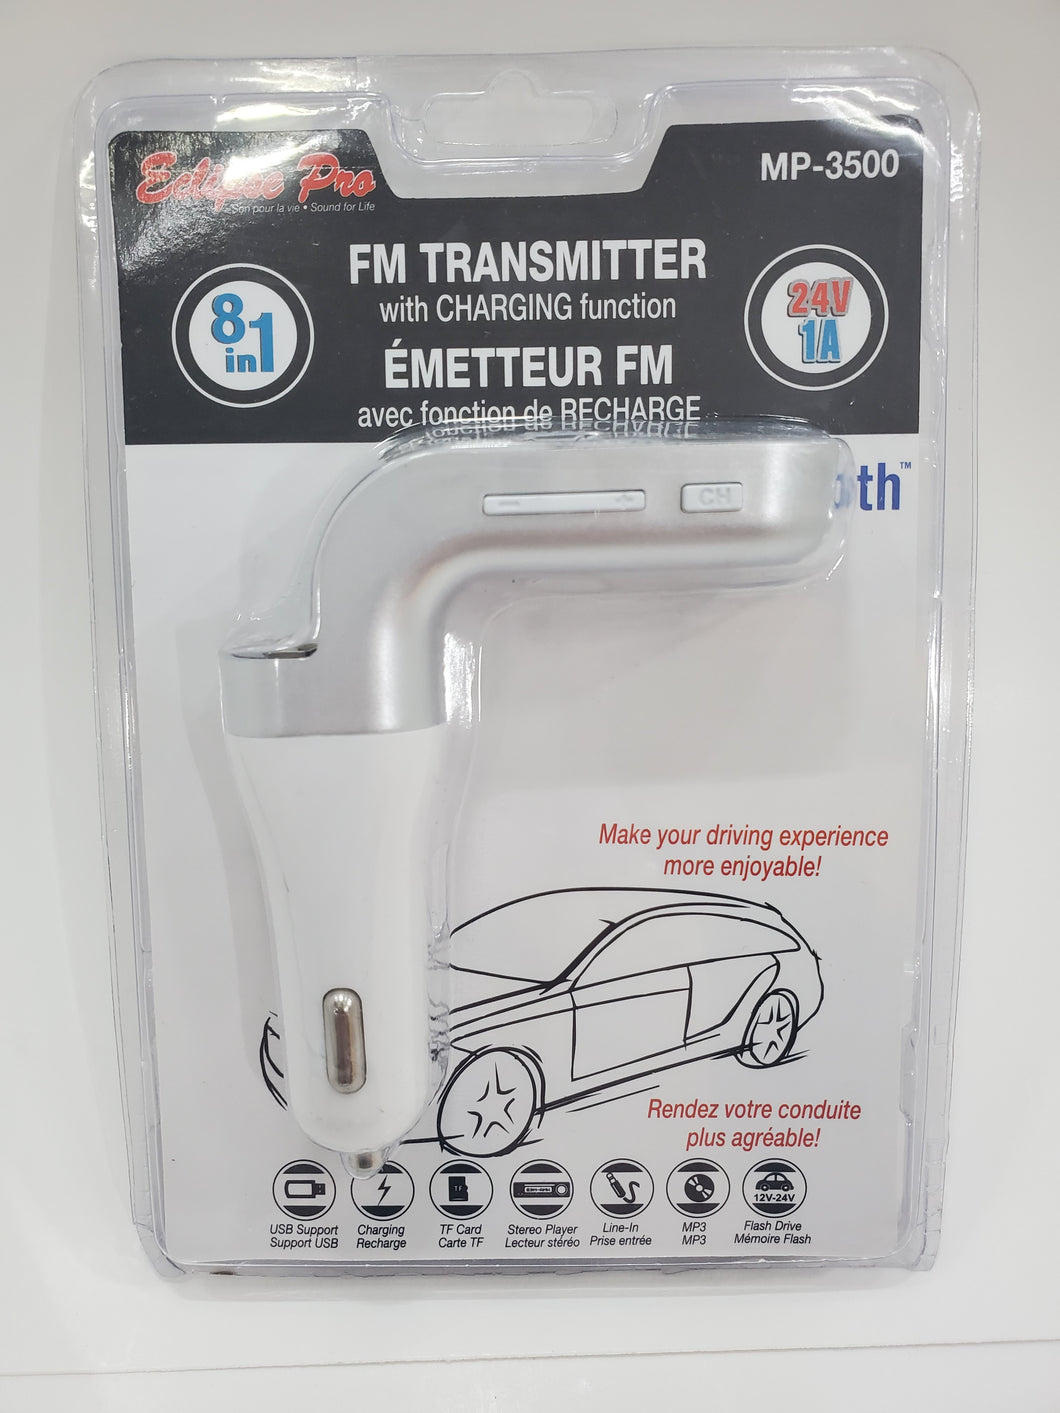 ECLIPSE PRO 8 in 1 FM Transmitter with Charging Function - MP-3500